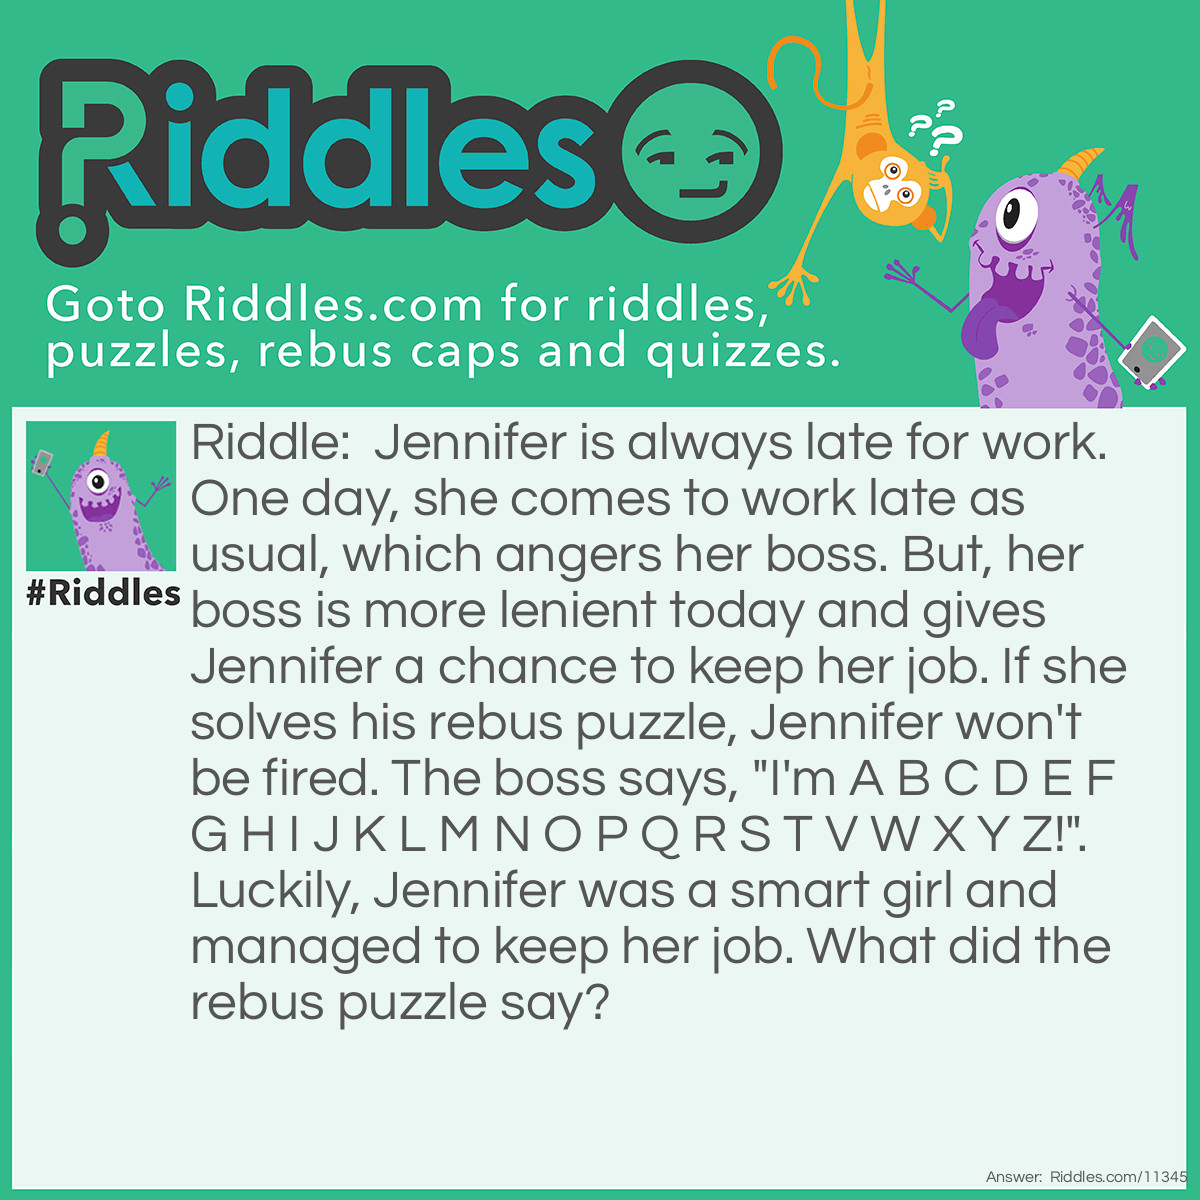 Riddle: Jennifer is always late for work. One day, she comes to work late as usual, which angers her boss. But, her boss is more lenient today and gives Jennifer a chance to keep her job. If she solves his rebus puzzle, Jennifer won't be fired. The boss says, "I'm A B C D E F G H I J K L M N O P Q R S T V W X Y Z!". Luckily, Jennifer was a smart girl and managed to keep her job. What did the rebus puzzle say? Answer: "I'm missing you". "A B C D E F G H I J K L M N O P Q R S T V W X Y Z" is missing the letter "U", which sounds like "I'm missing you (U)".